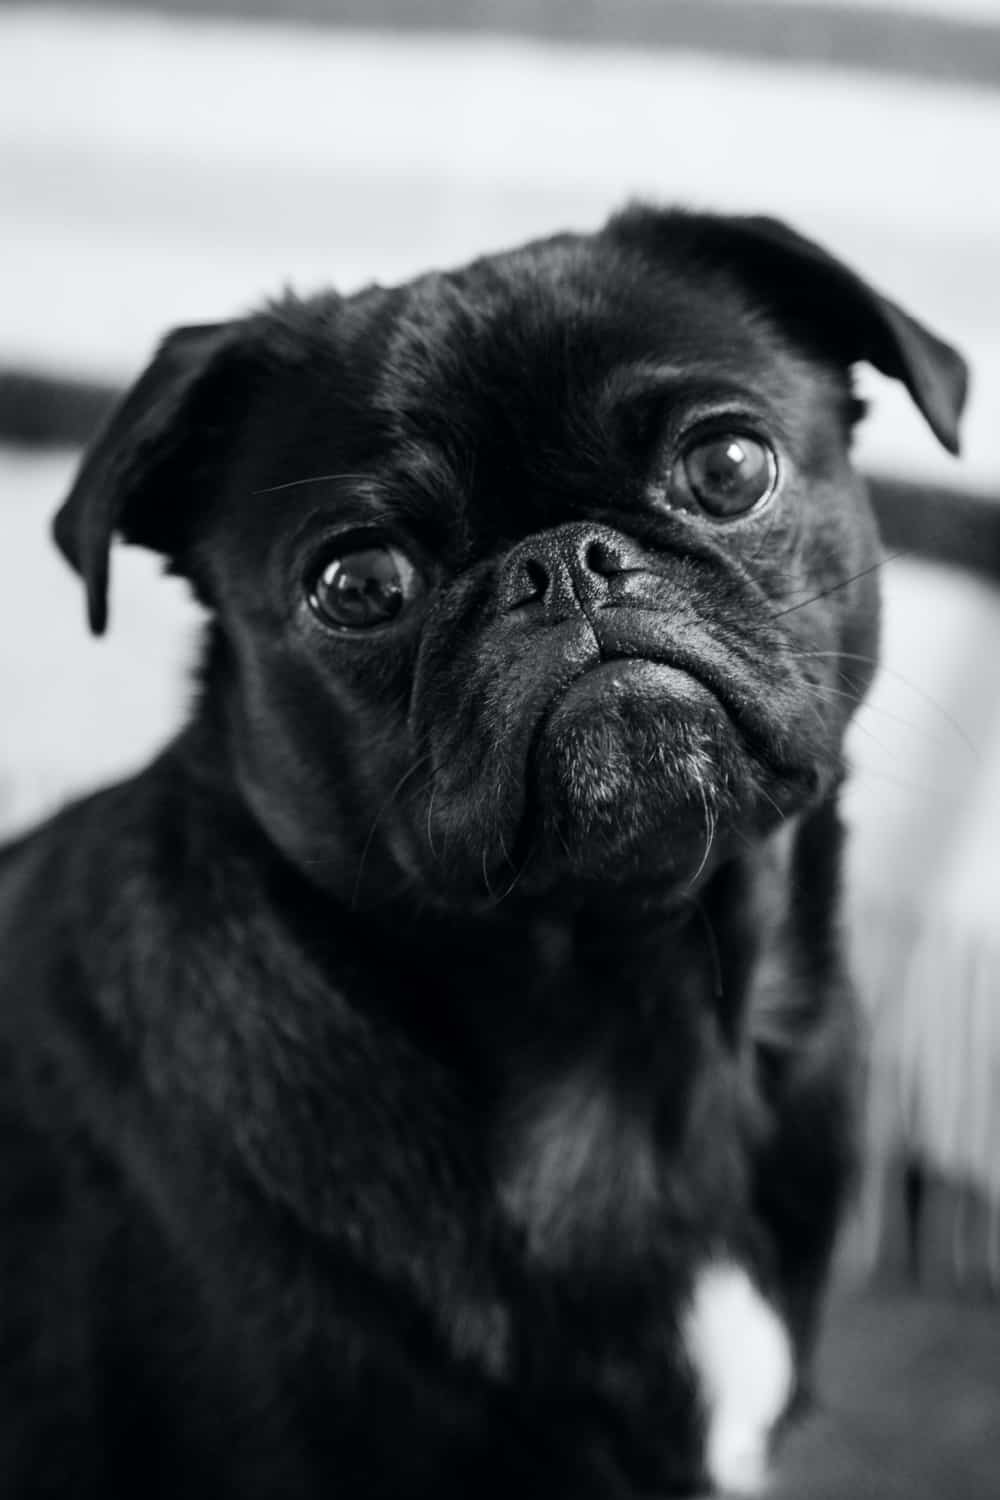 A pug dog wearing a sad expression | Bible verses for sadness and loneliness